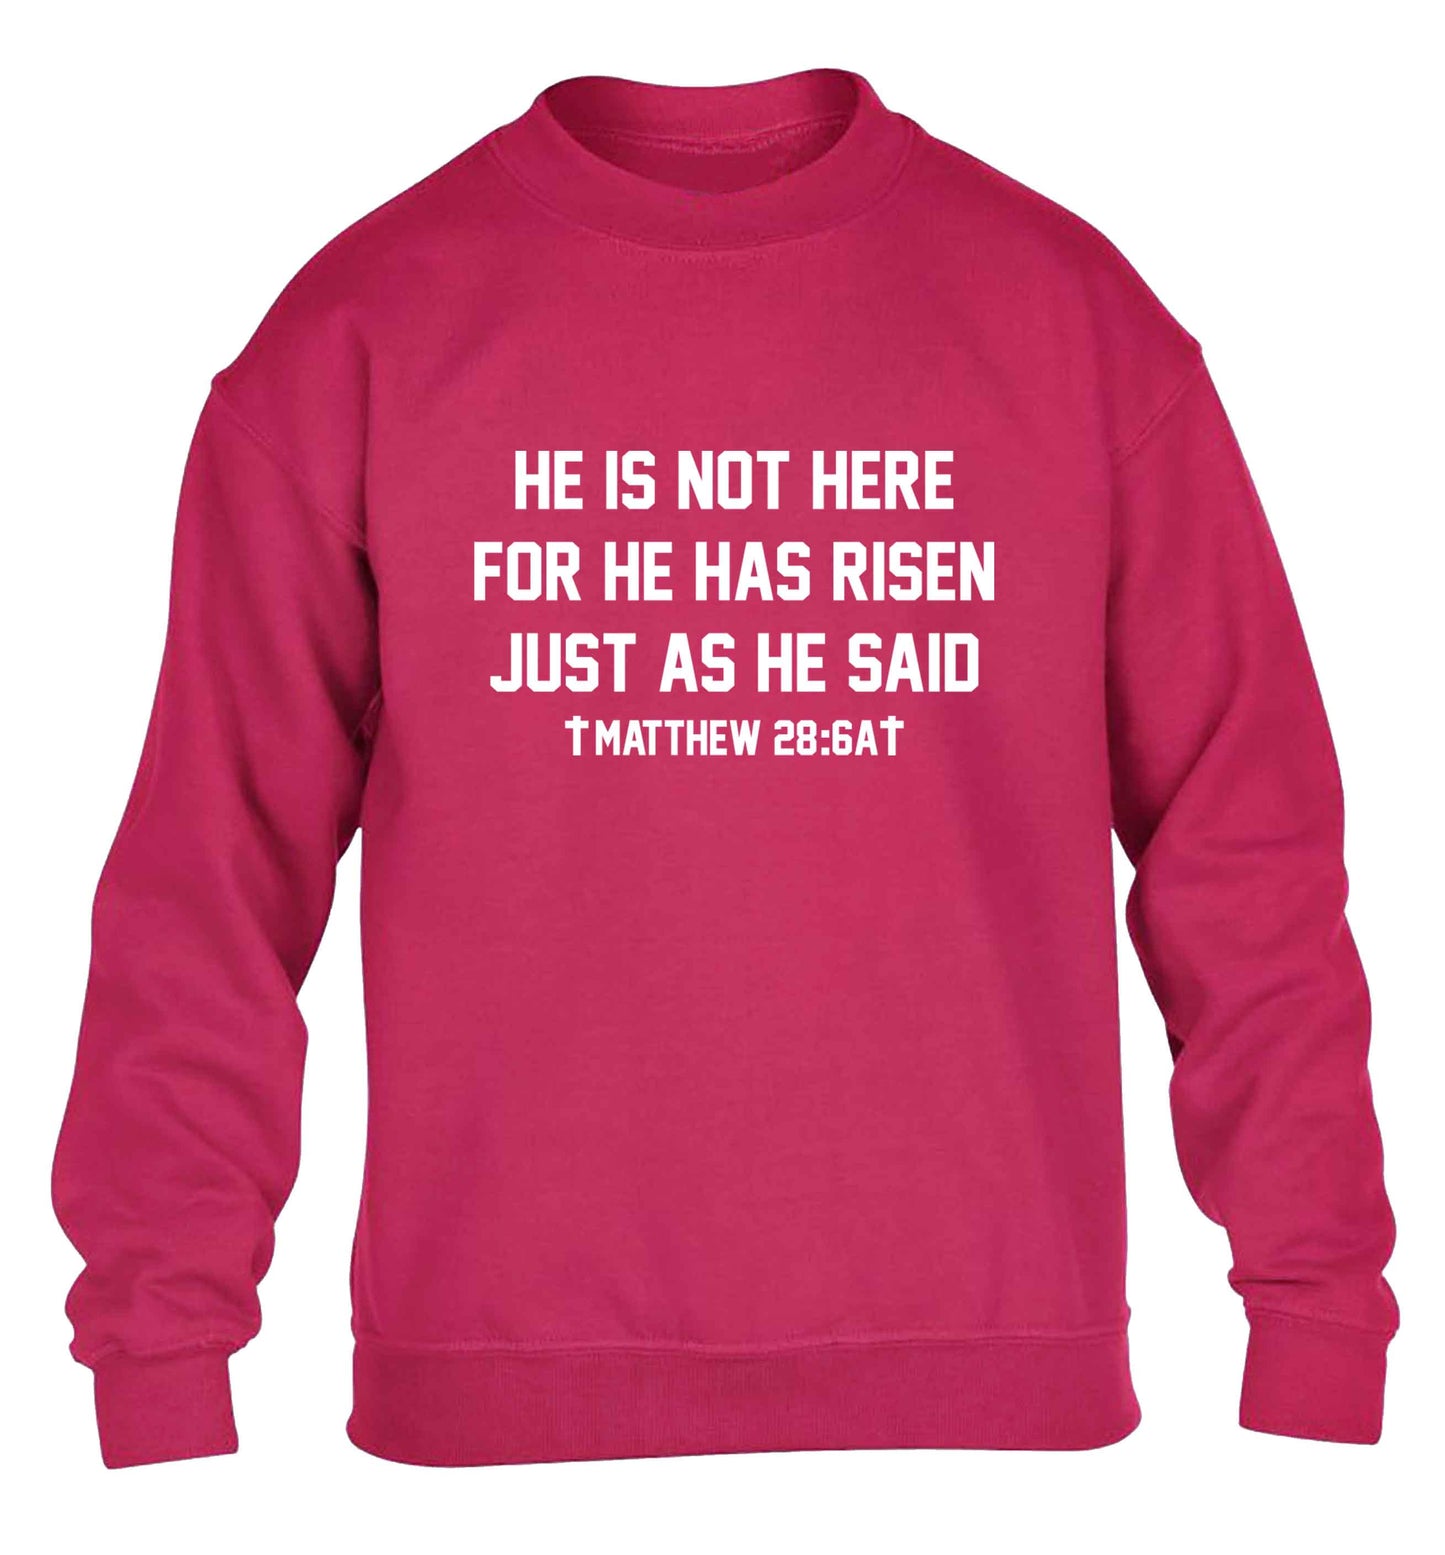 He is not here for he has risen just as he said matthew 28:6A children's pink sweater 12-13 Years